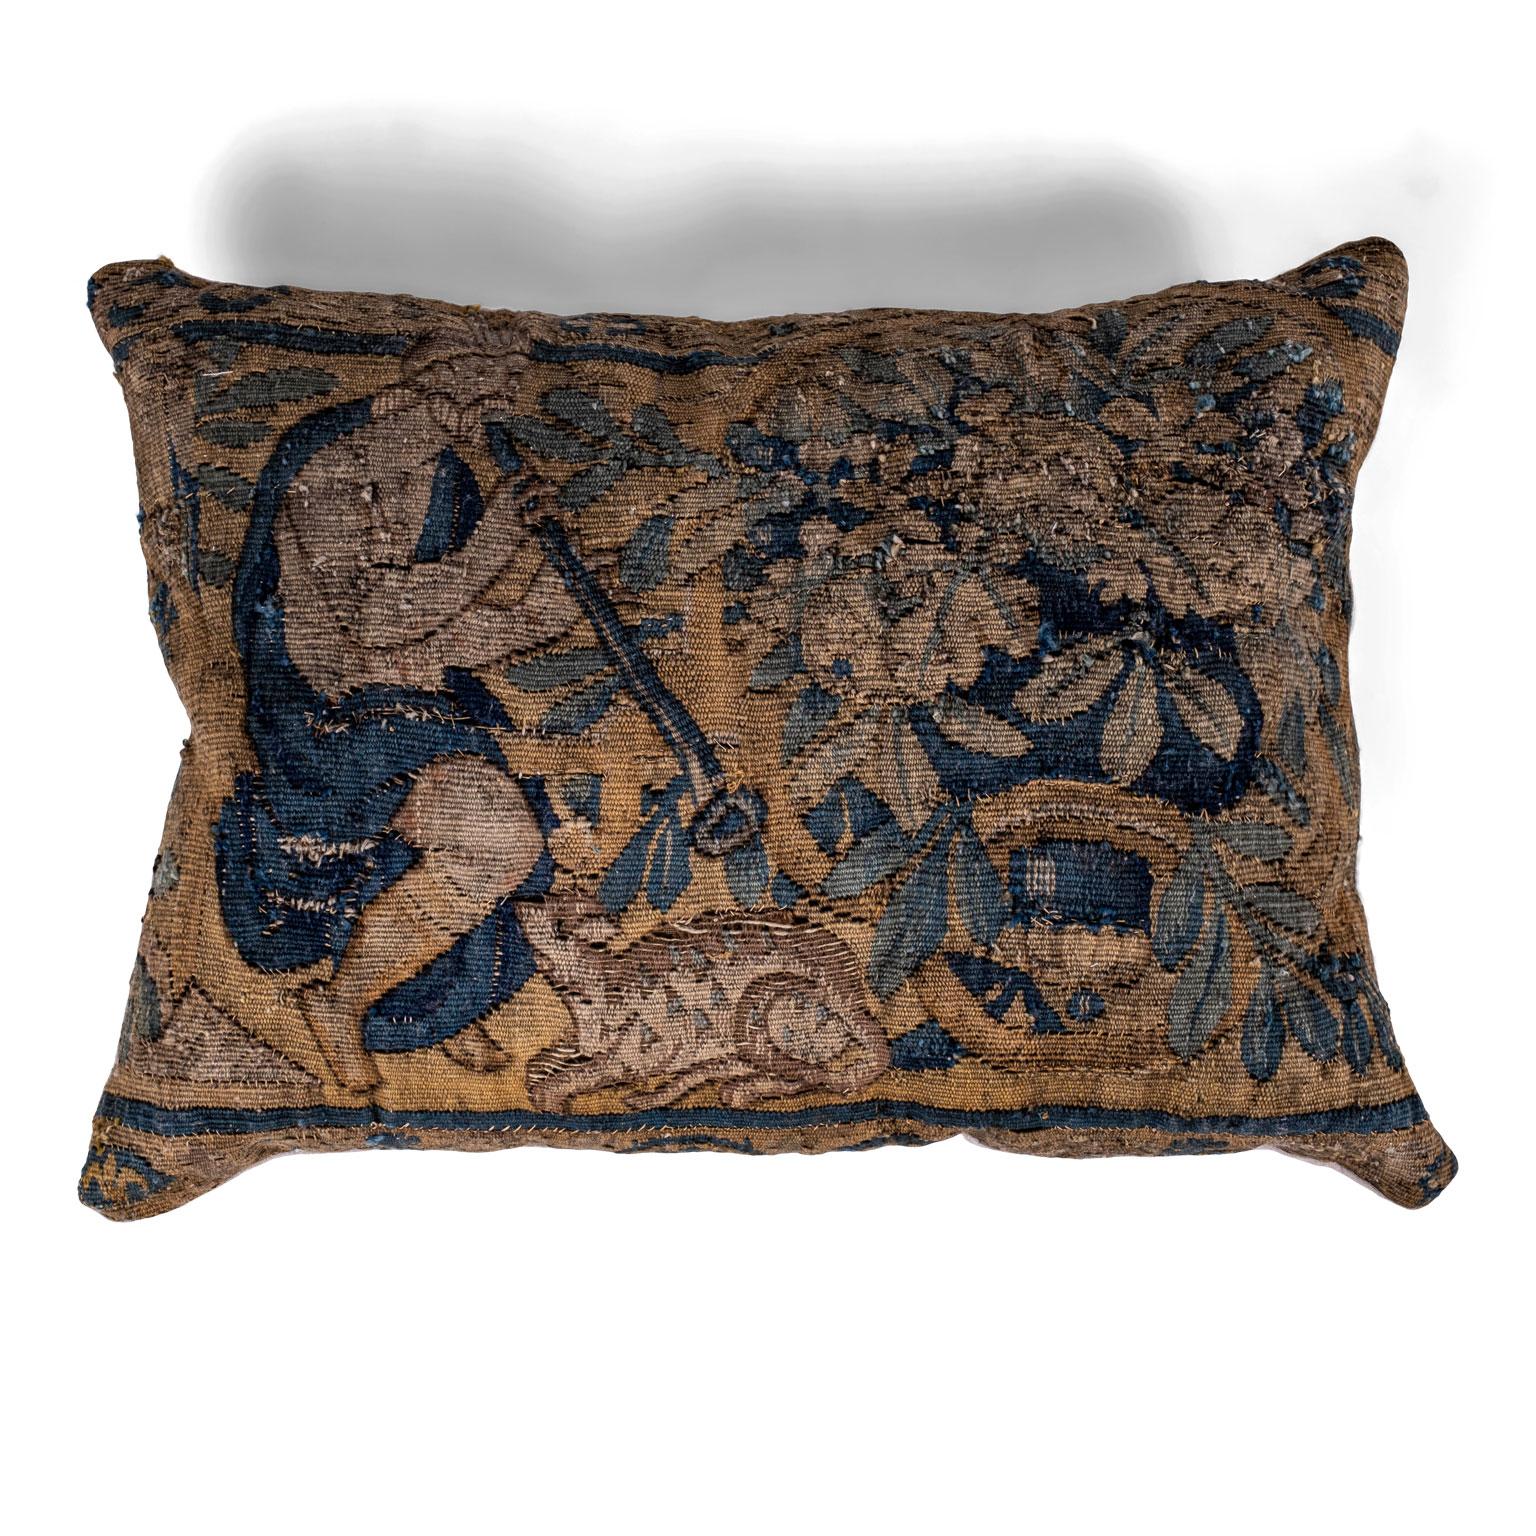 Pair of Flemish tapestry cushions. Two decorative cushions made with fragments of a 17th century Flemish tapestry. Sold individually and priced $1,200 each.